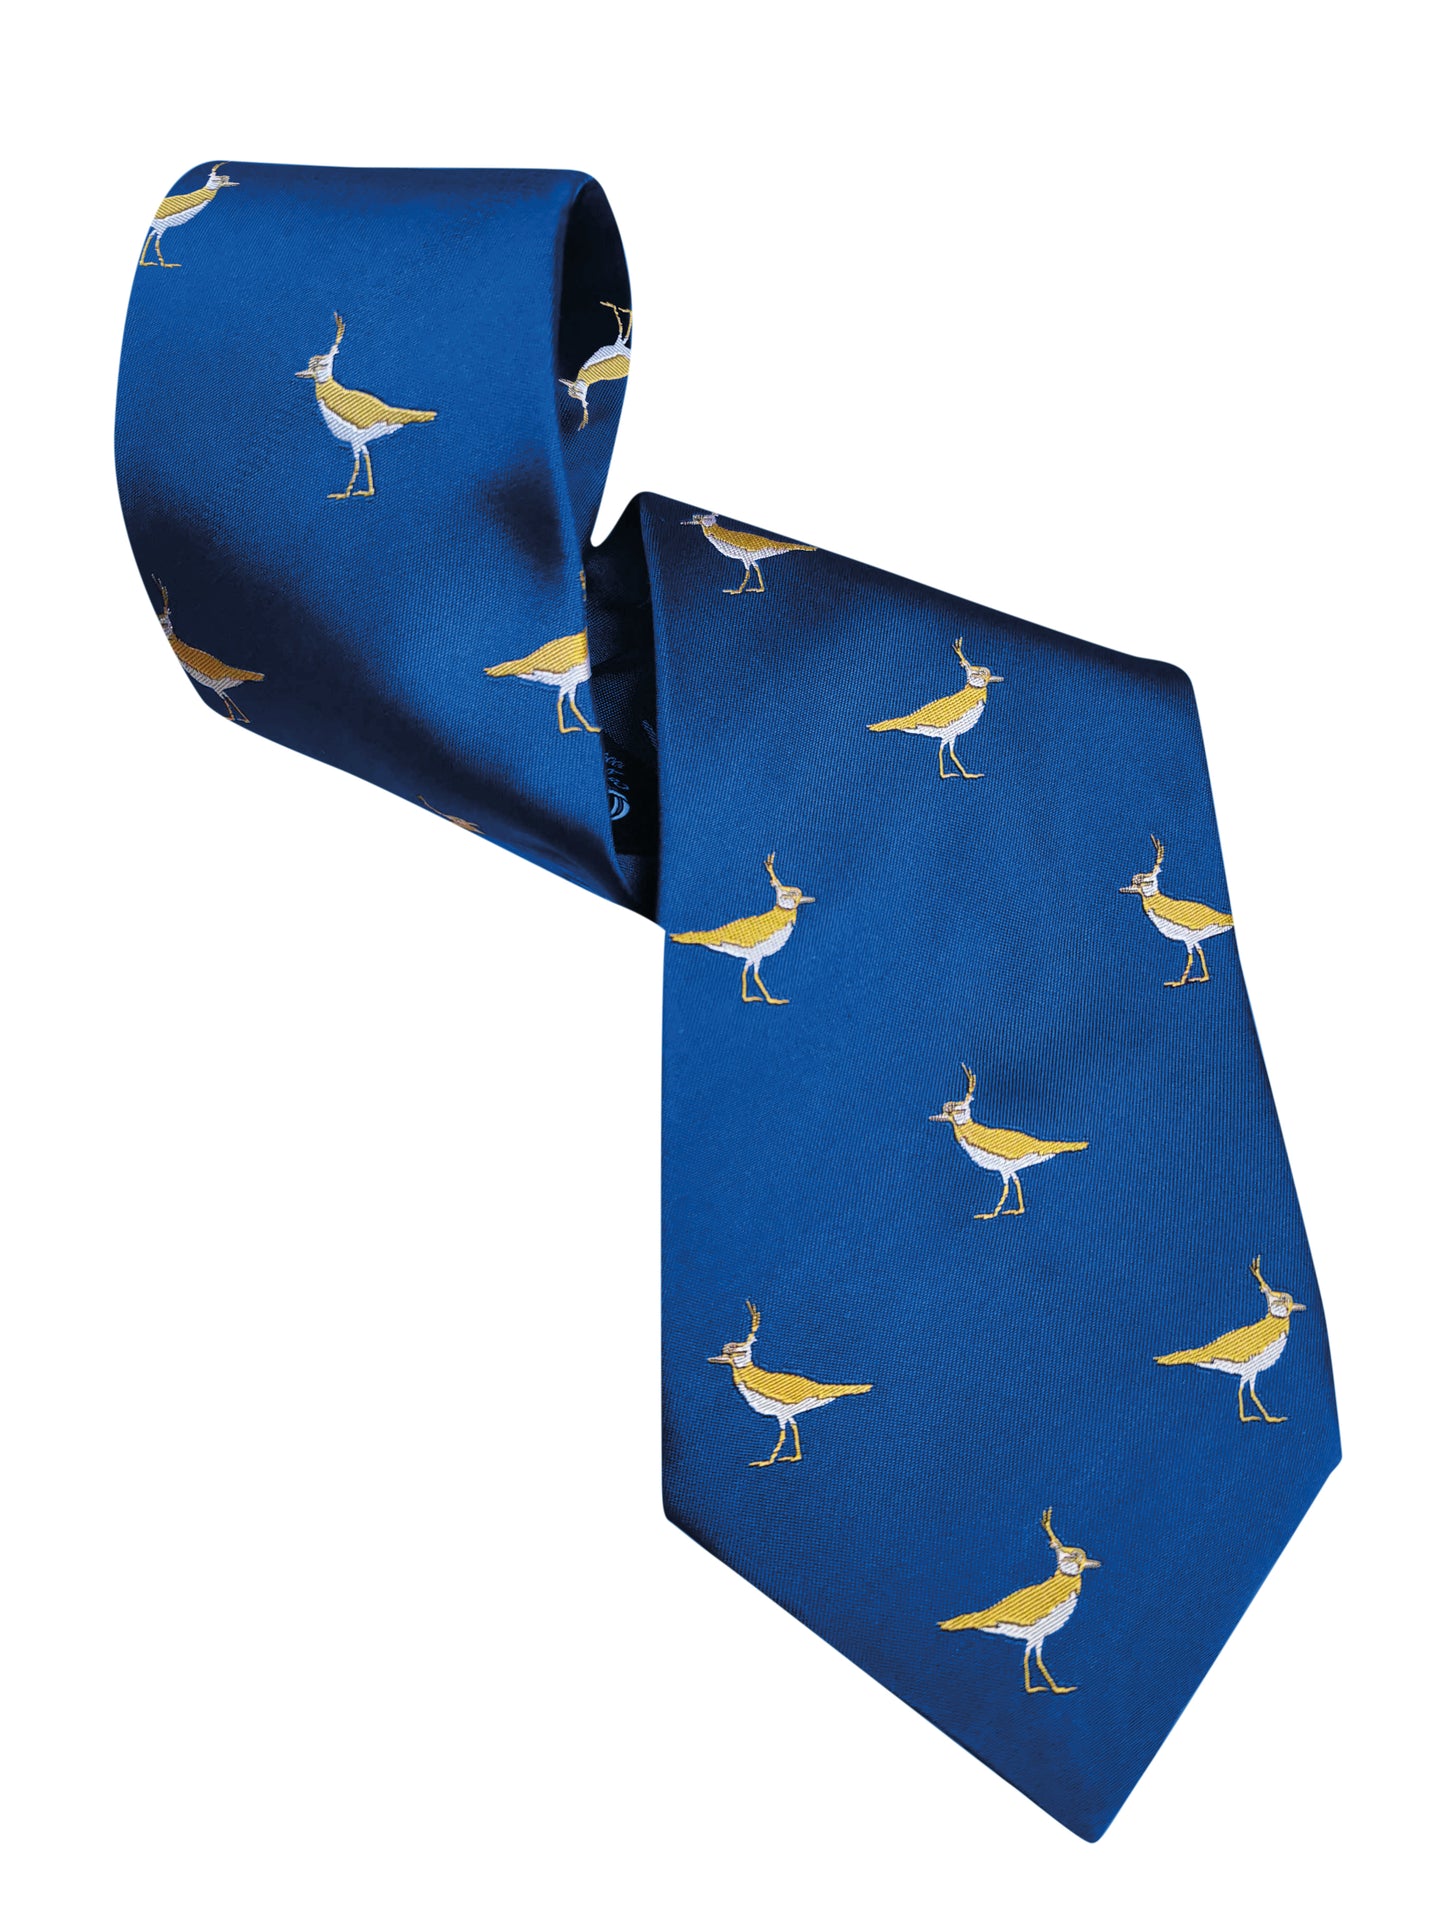 GWCT 'Special Edition' Empire Blue Lapwing Silk Tie